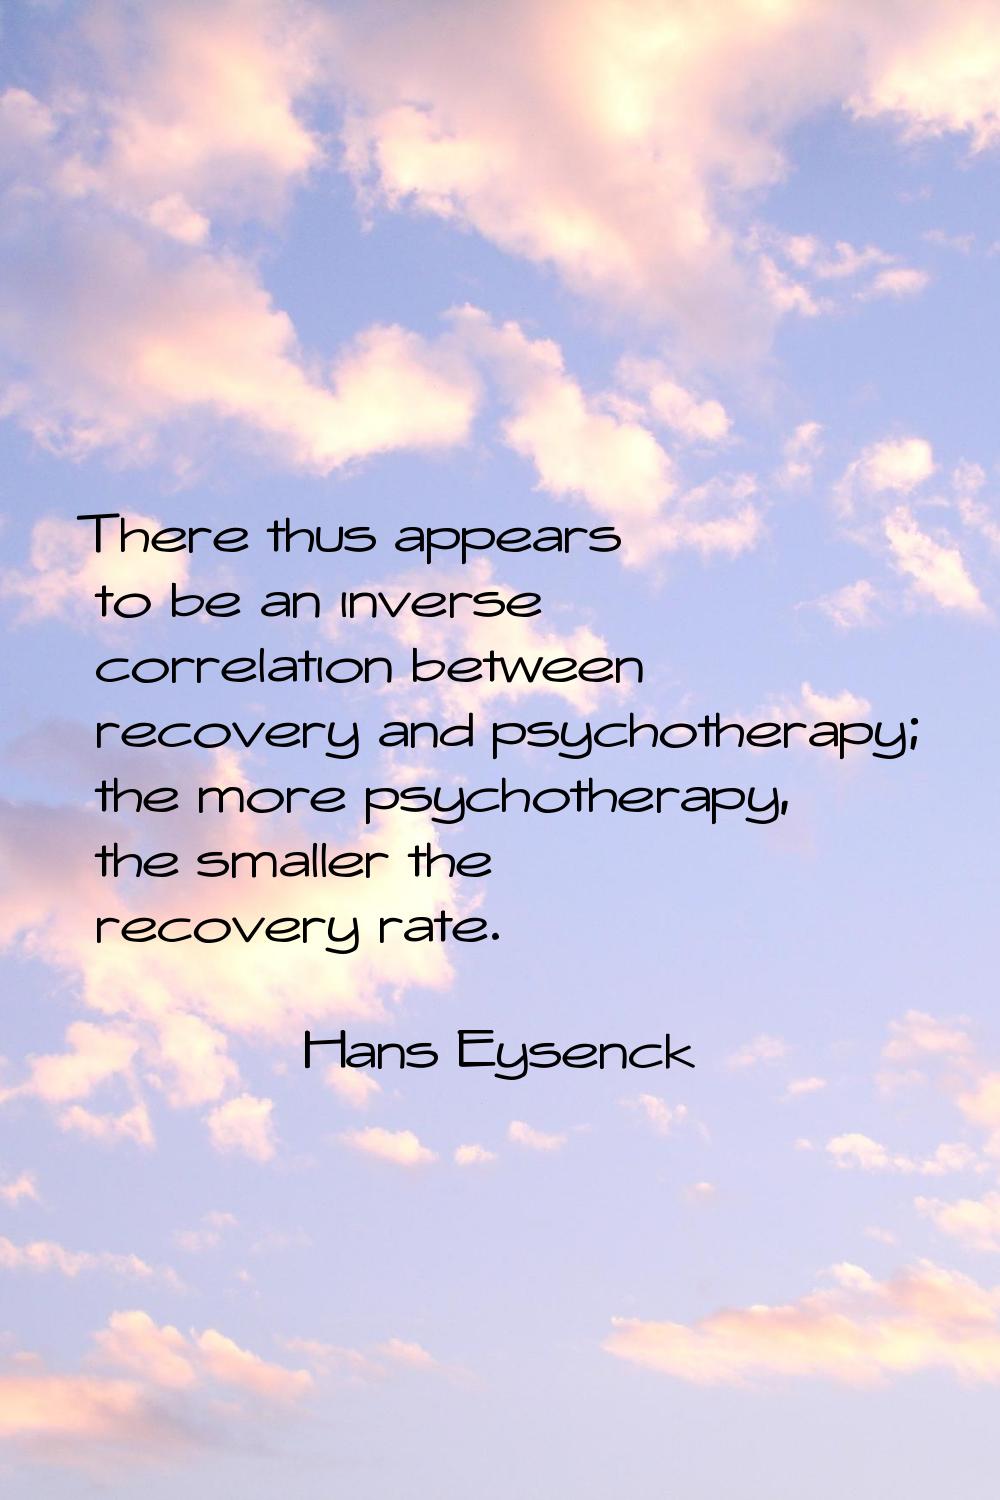 There thus appears to be an inverse correlation between recovery and psychotherapy; the more psycho